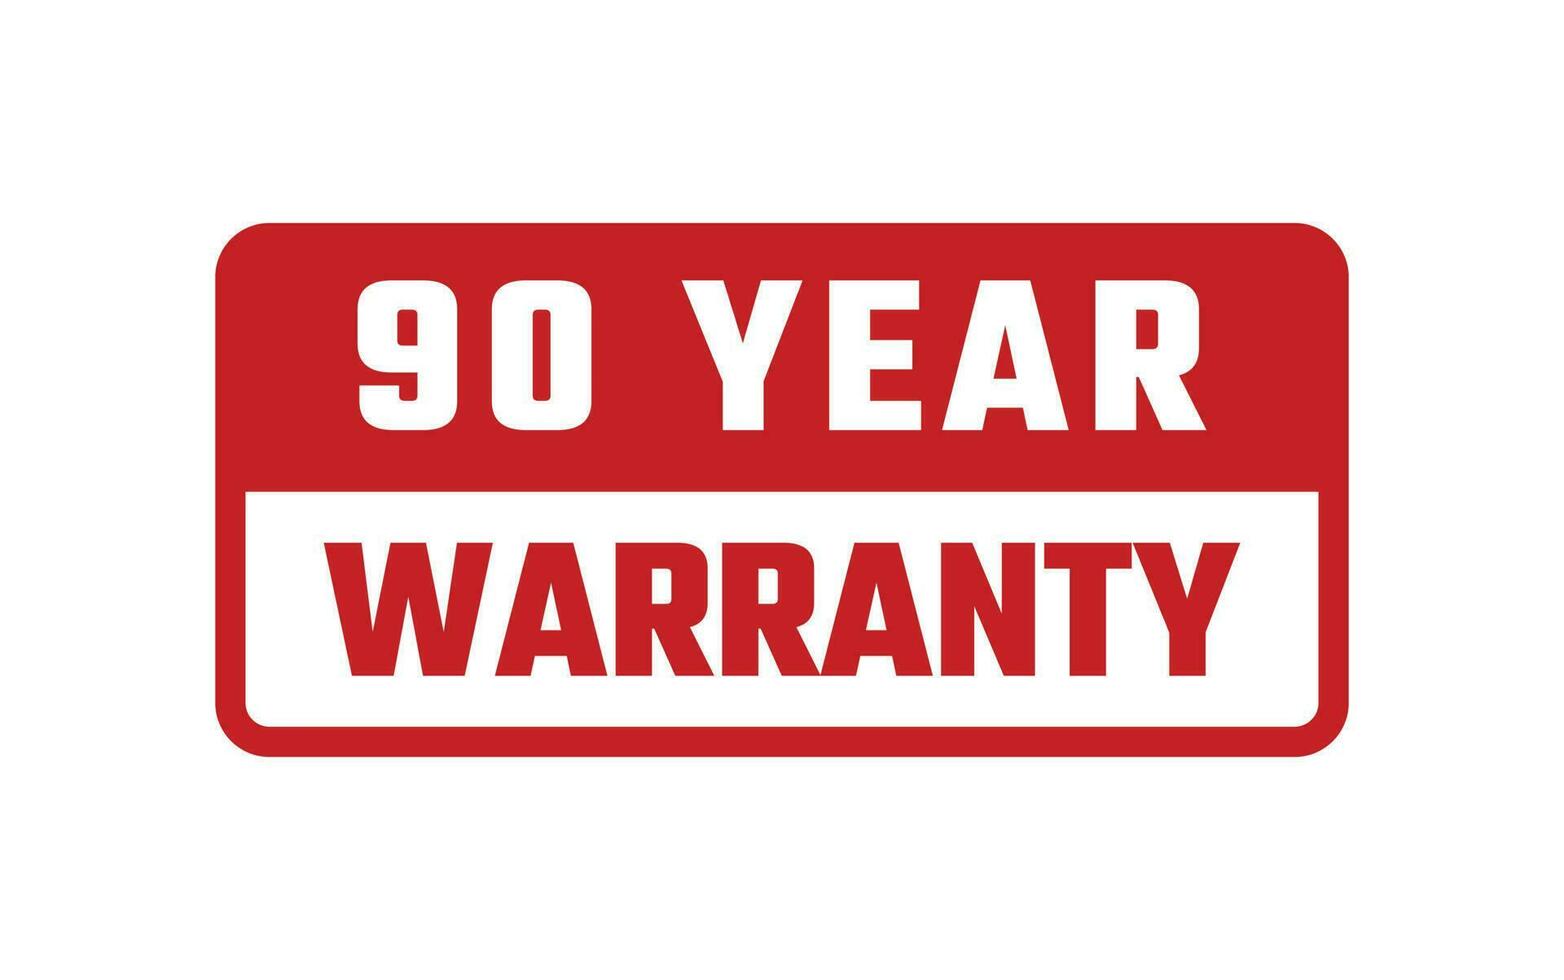 90 Year Warranty Rubber Stamp vector